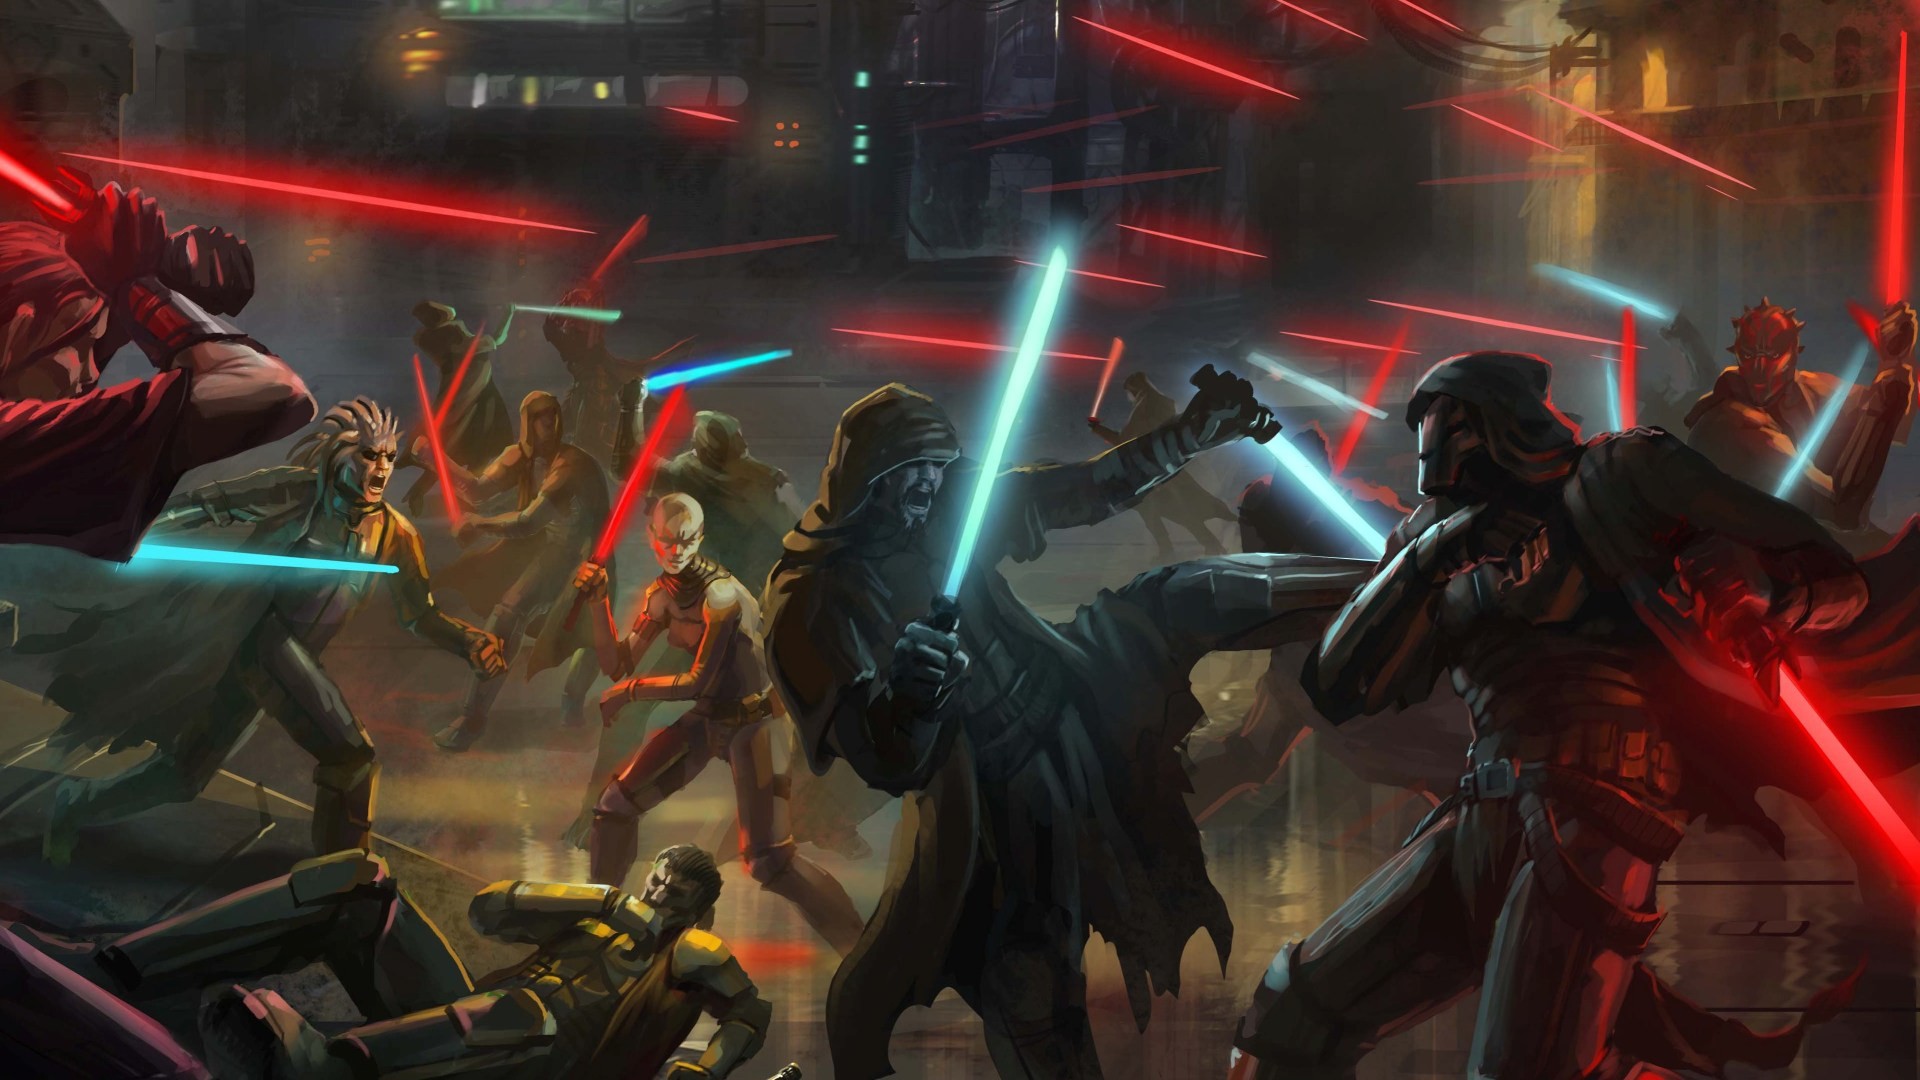 1920x1080 Star Wars Fight Wallpaper for Phones and Tablets